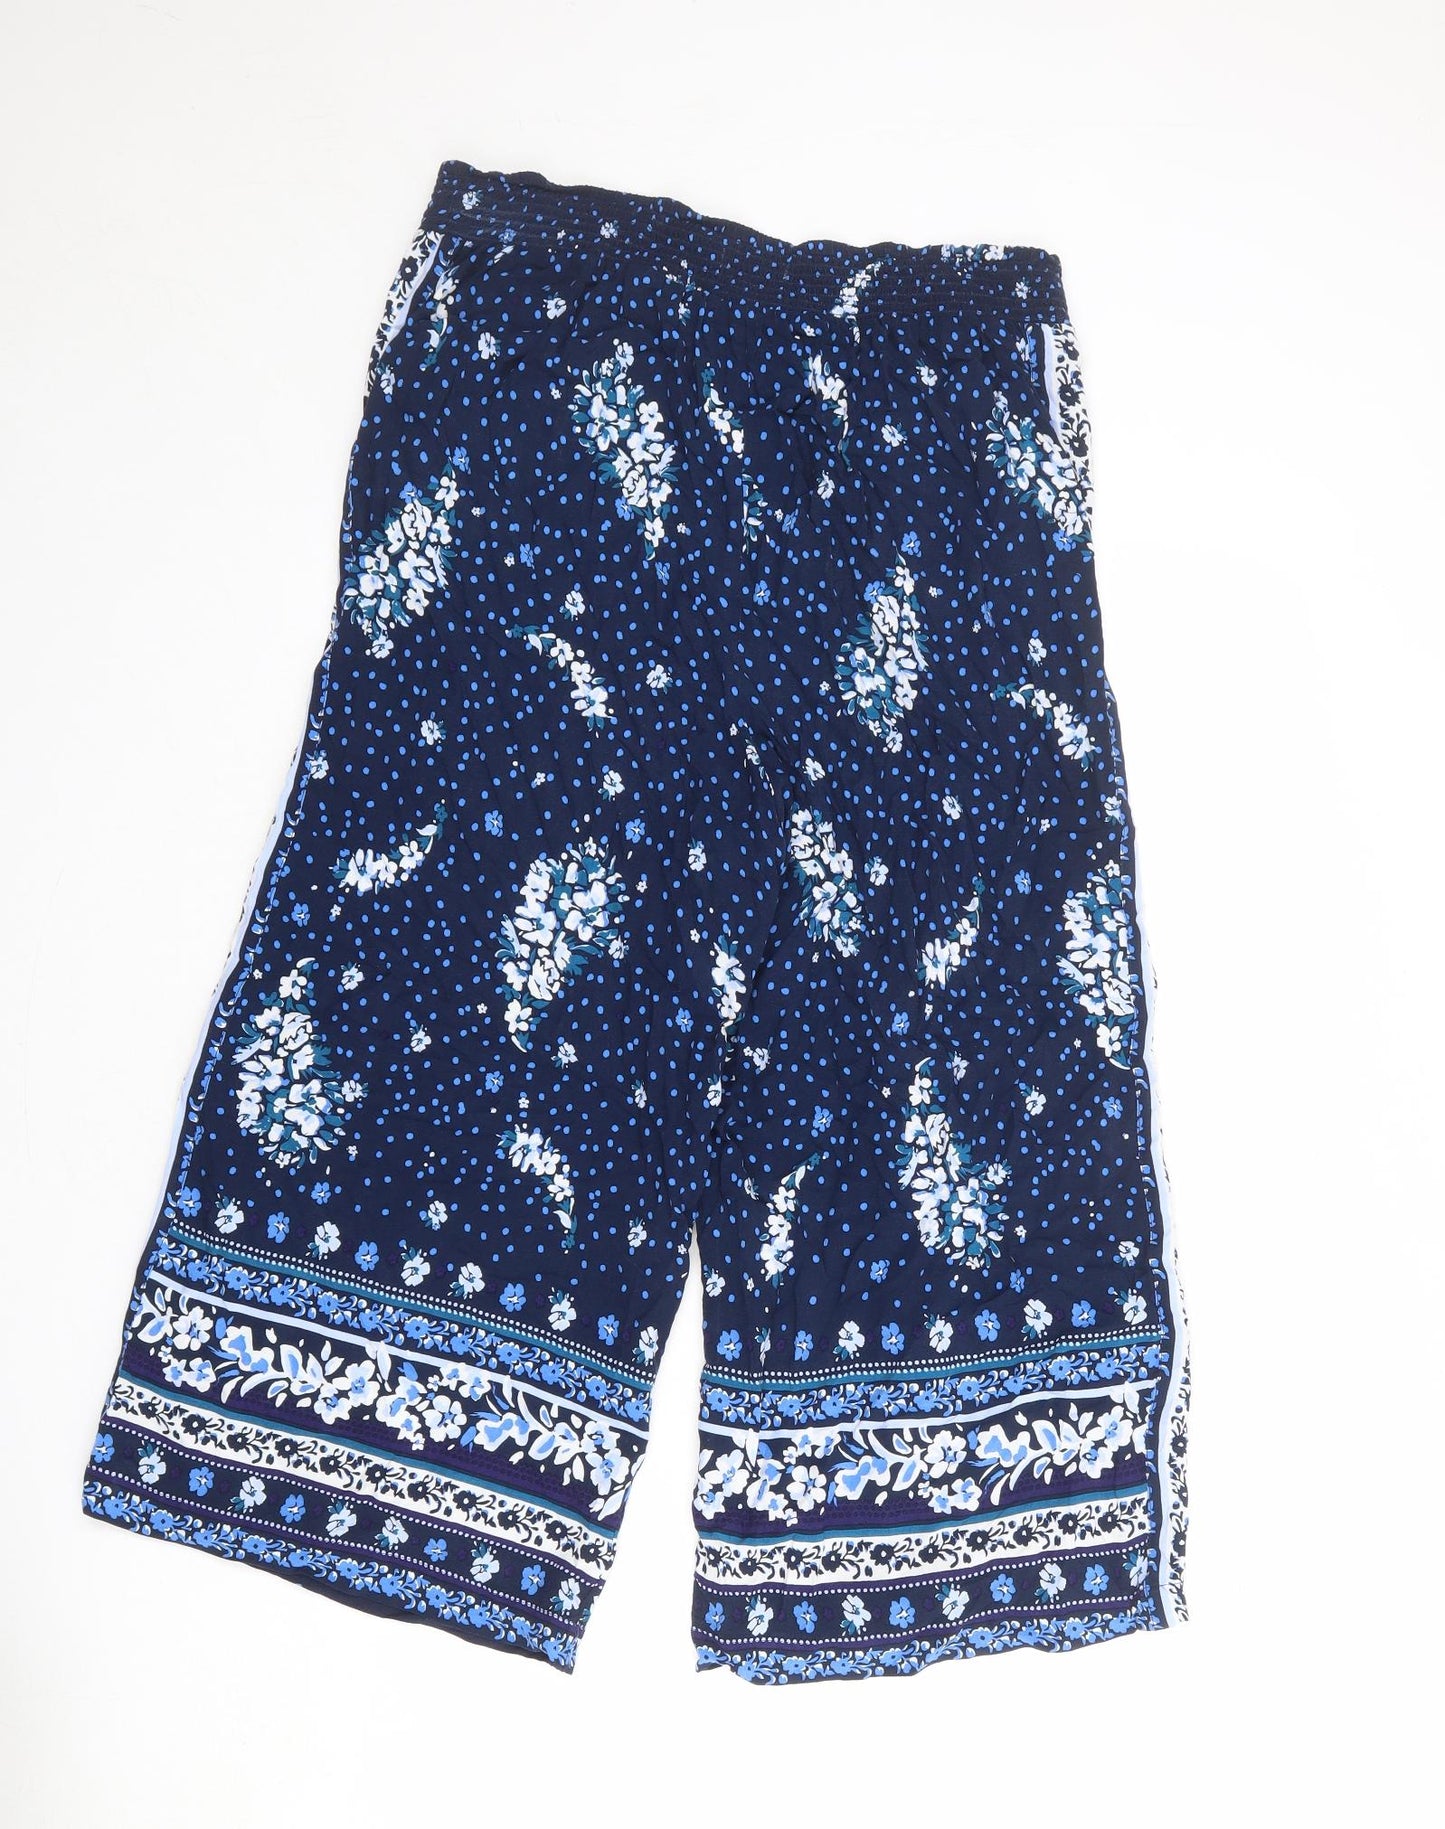 Monsoon Womens Blue Paisley Viscose Trousers Size M L21 in Regular